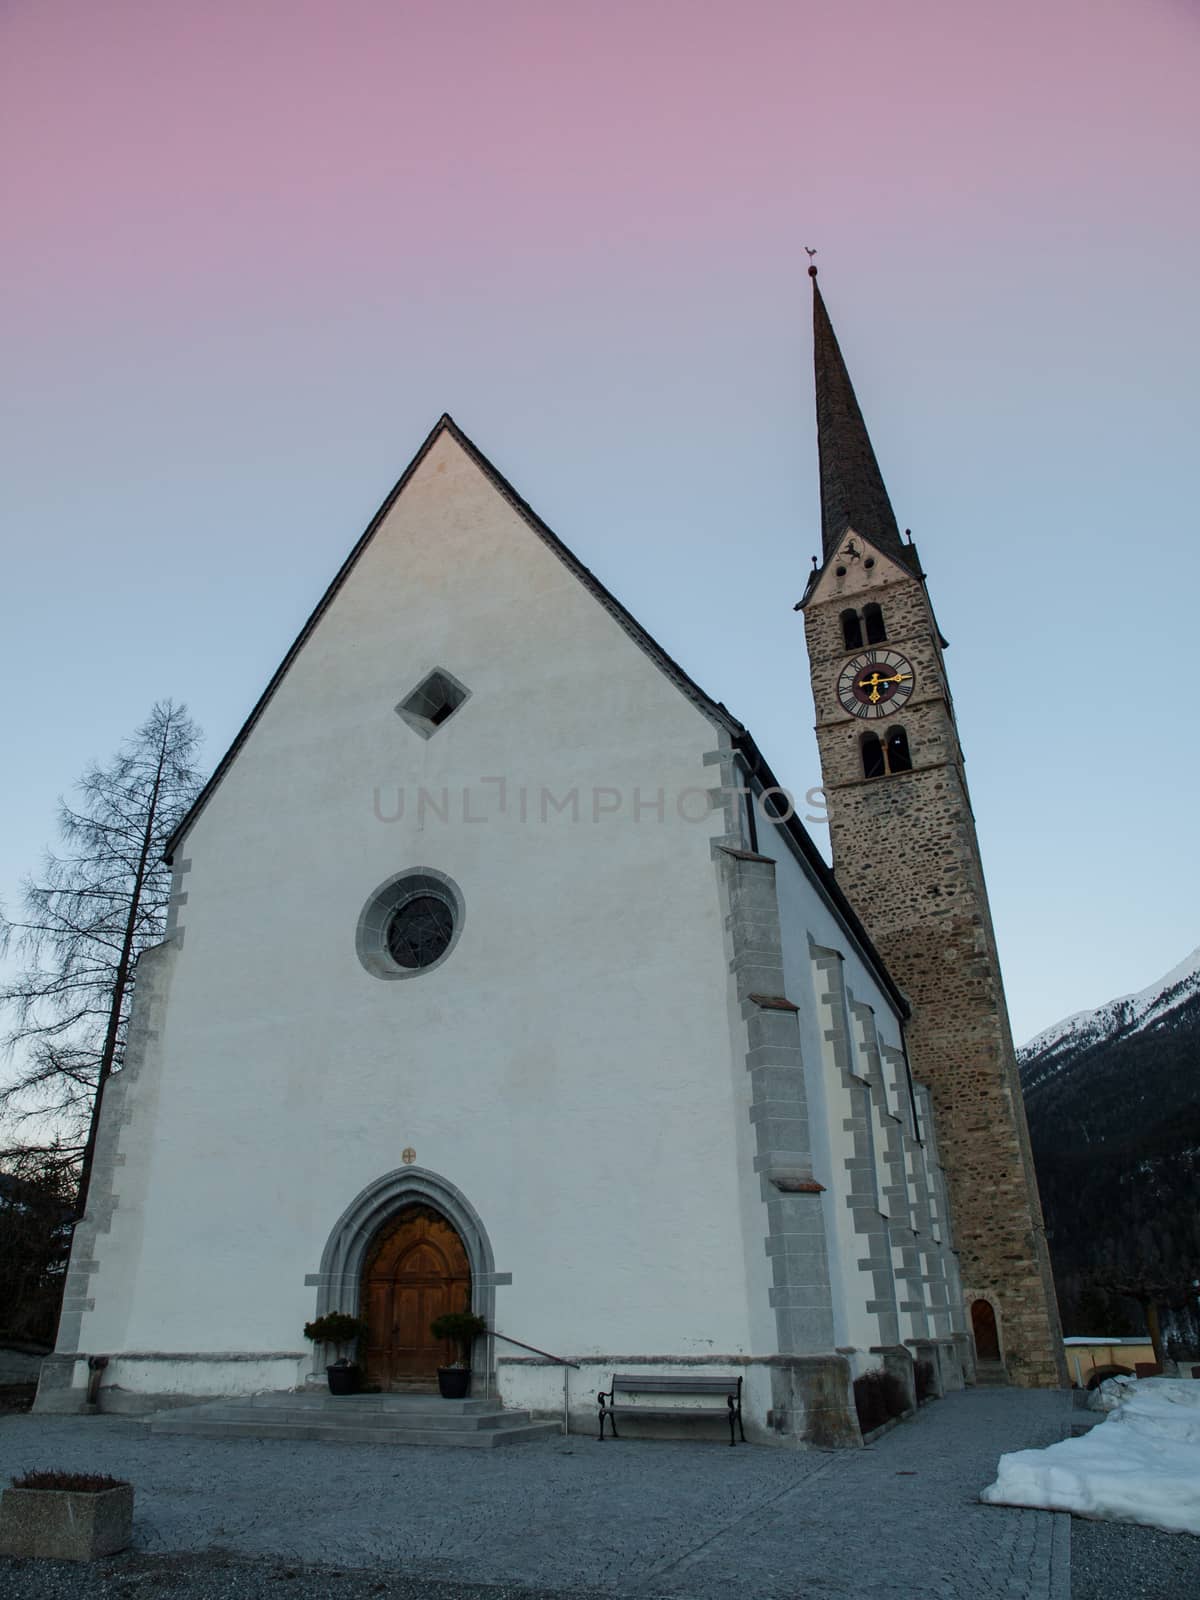 Scuol church in winter time evening by pyty